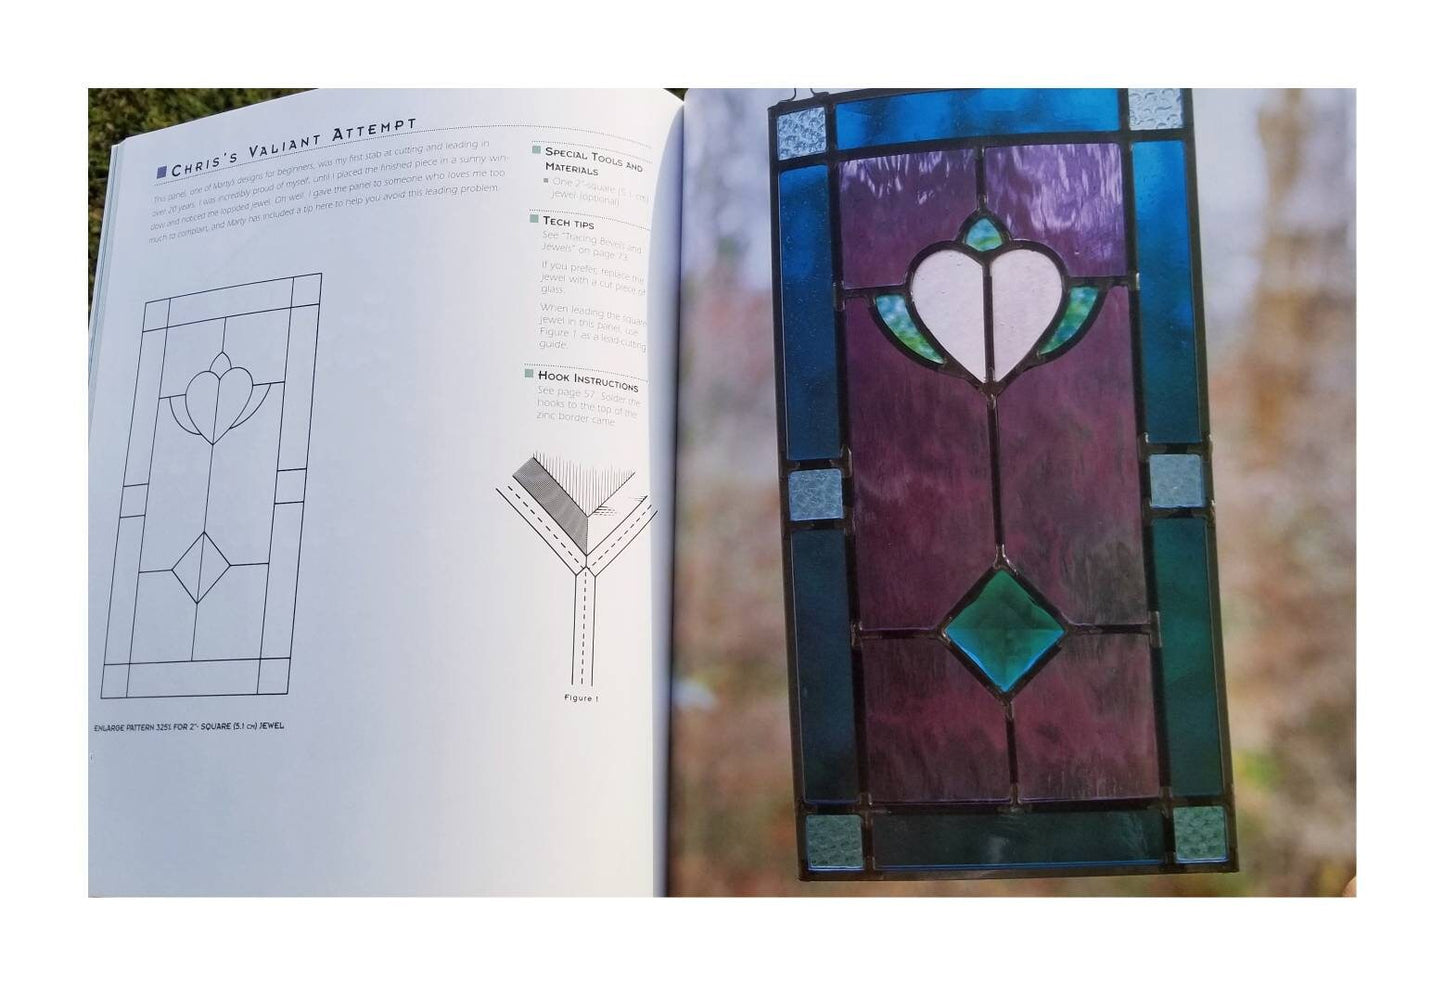 Stained Glass Basics Book, Patterns & Projects. Learn how to create copper foil, leaded glass. Comprehensive Instructions for many projects